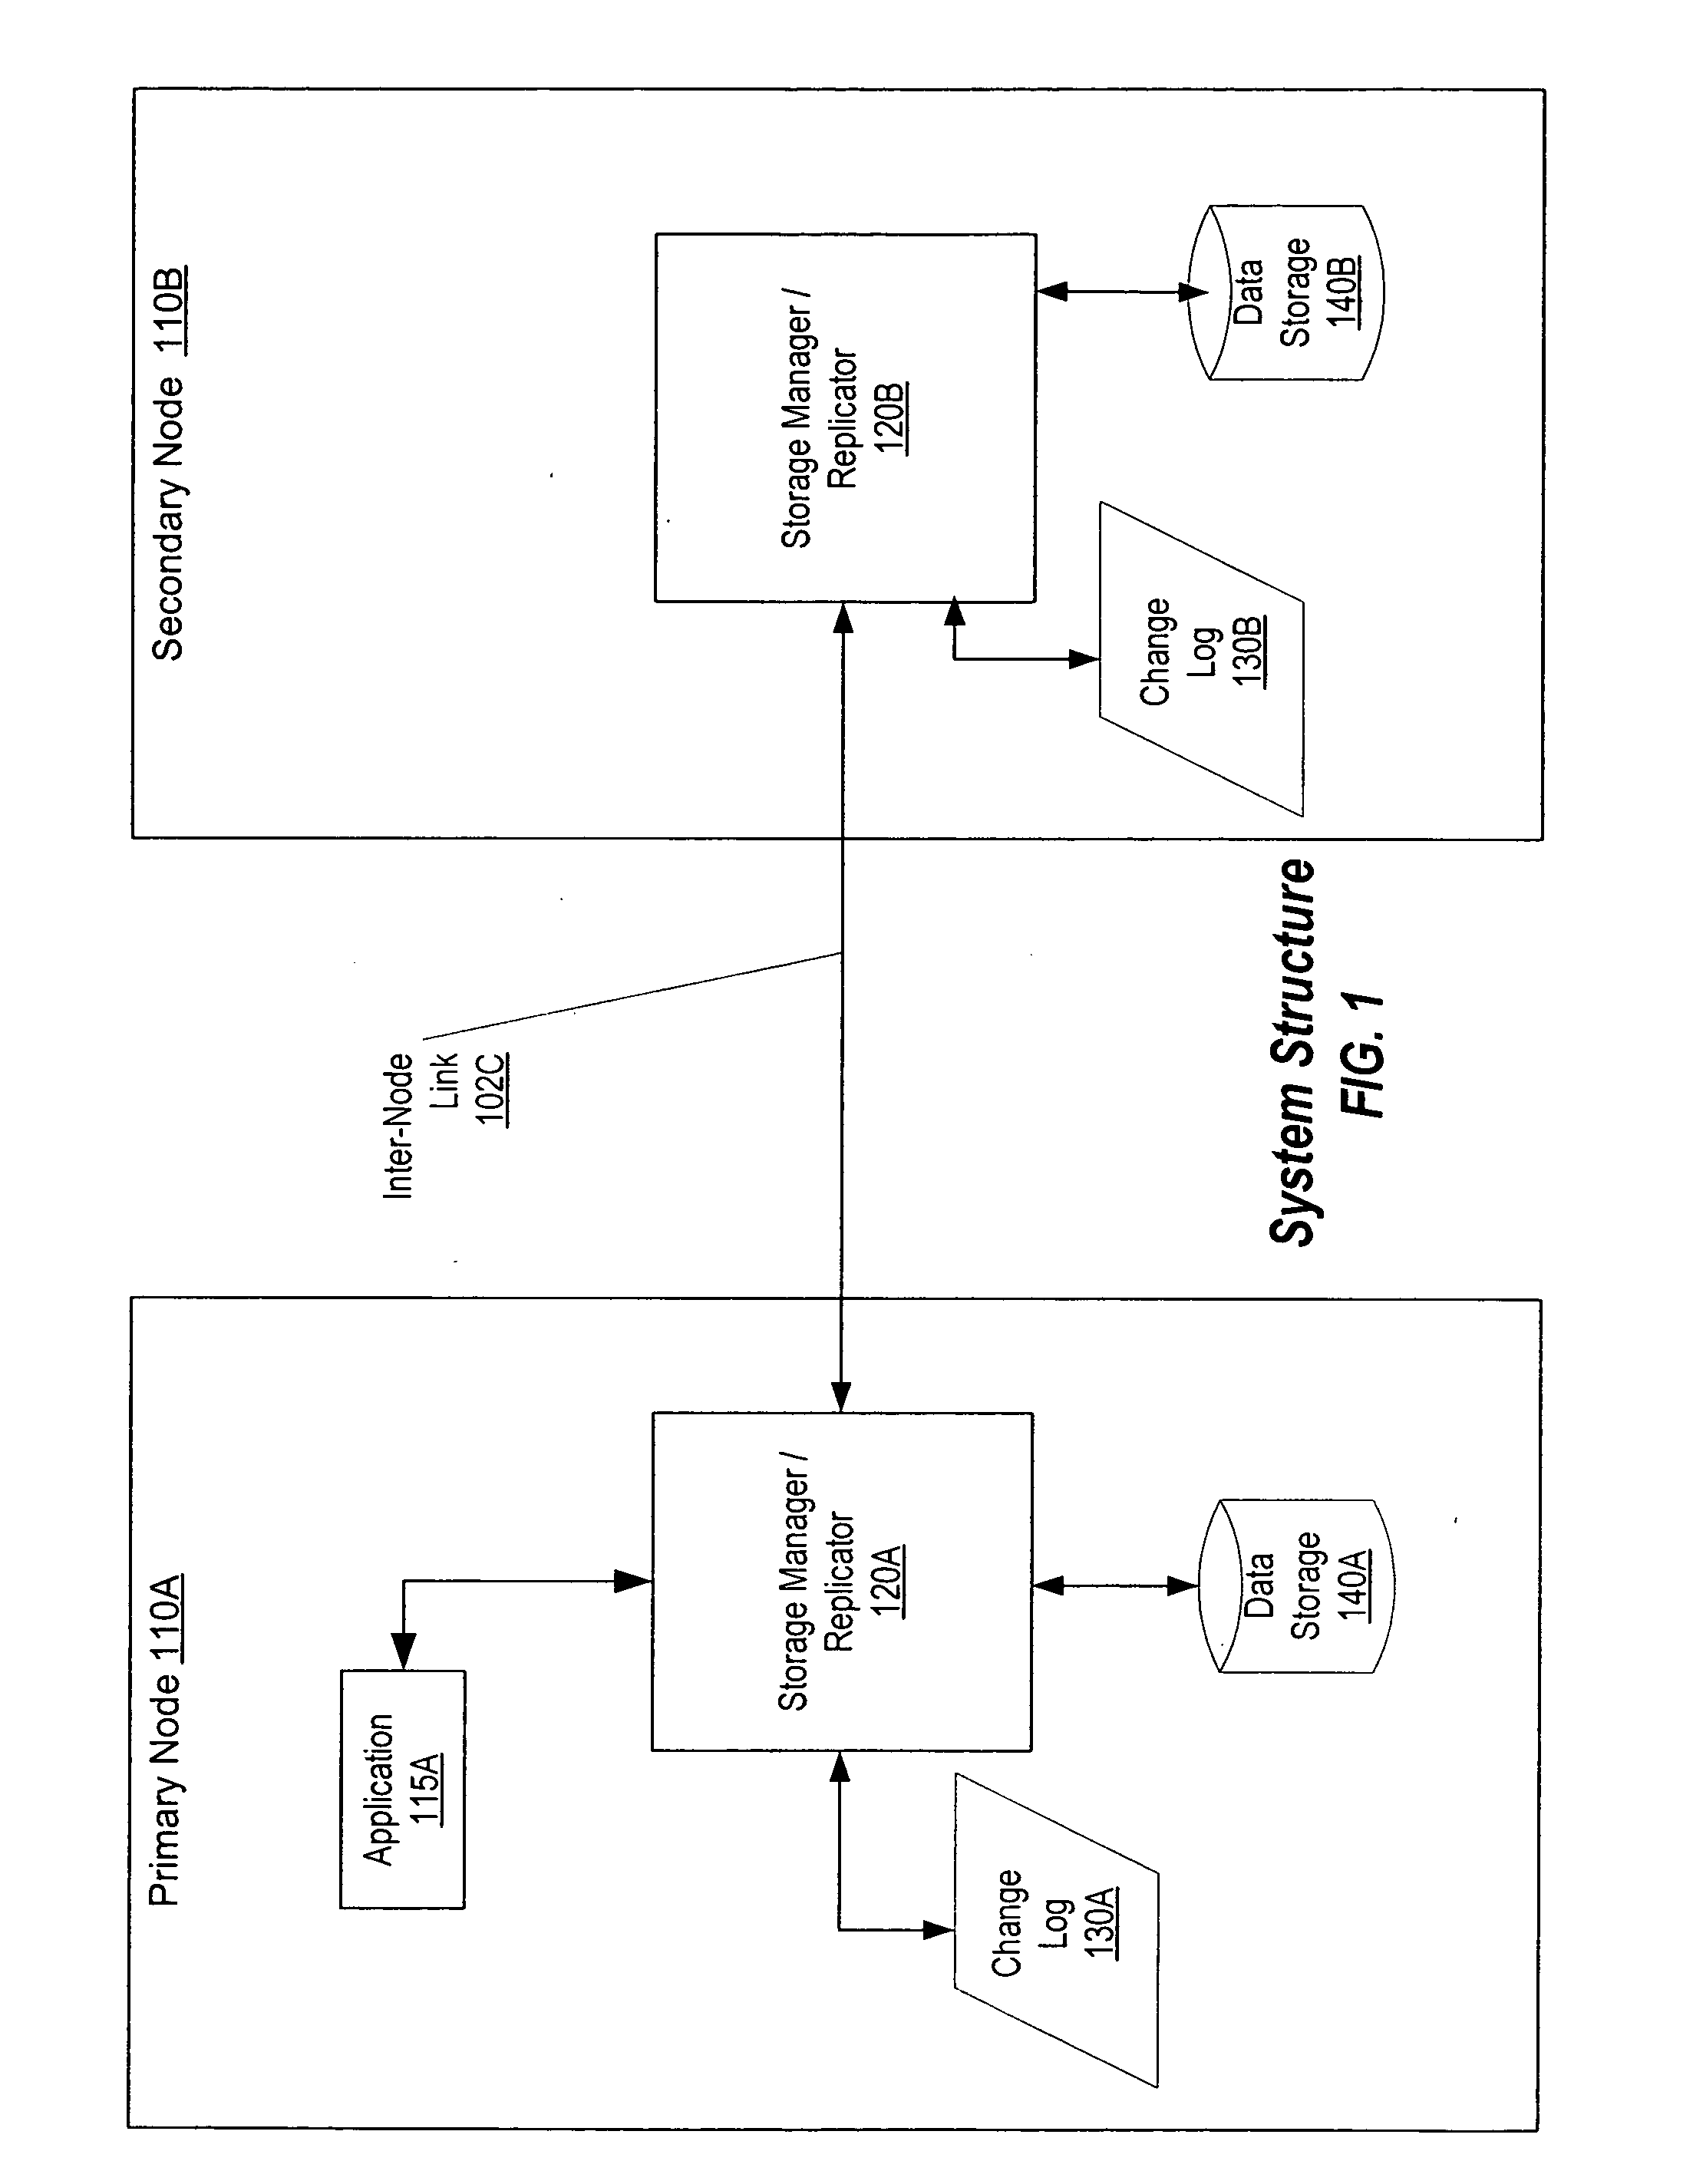 Performance of operations on selected data in a storage area